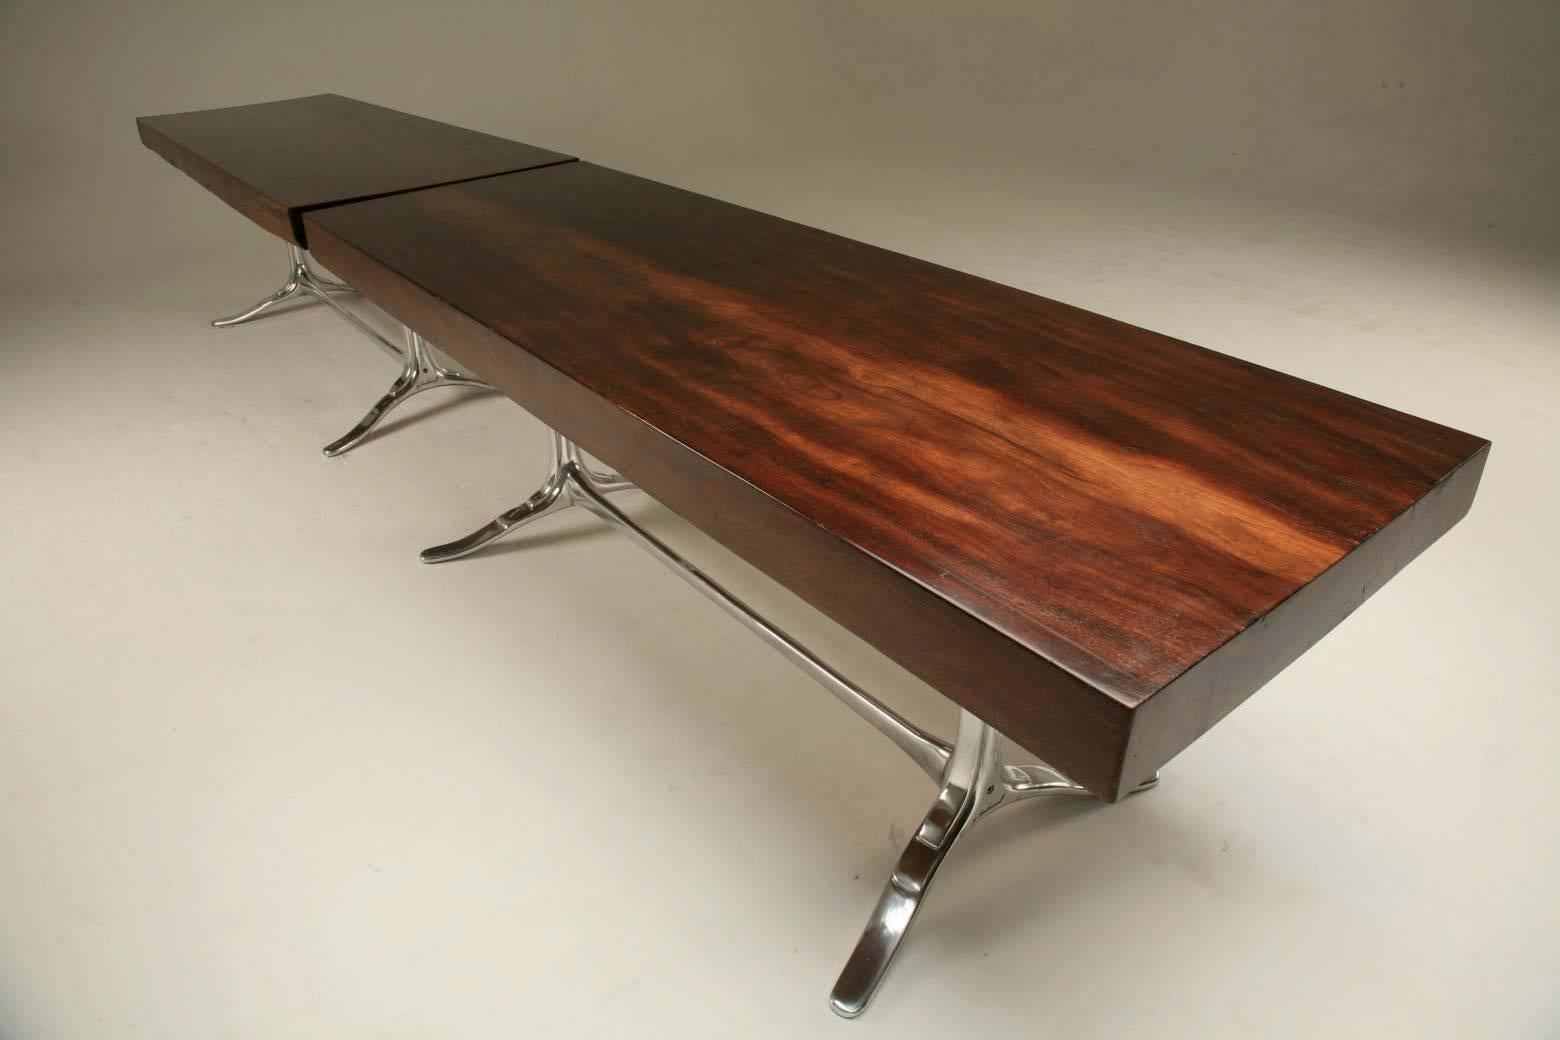 Pair of Tables, Antique Hardwood on Sand-Cast Aluminum Base, by P. Tendercool In New Condition For Sale In Bangkok, TH